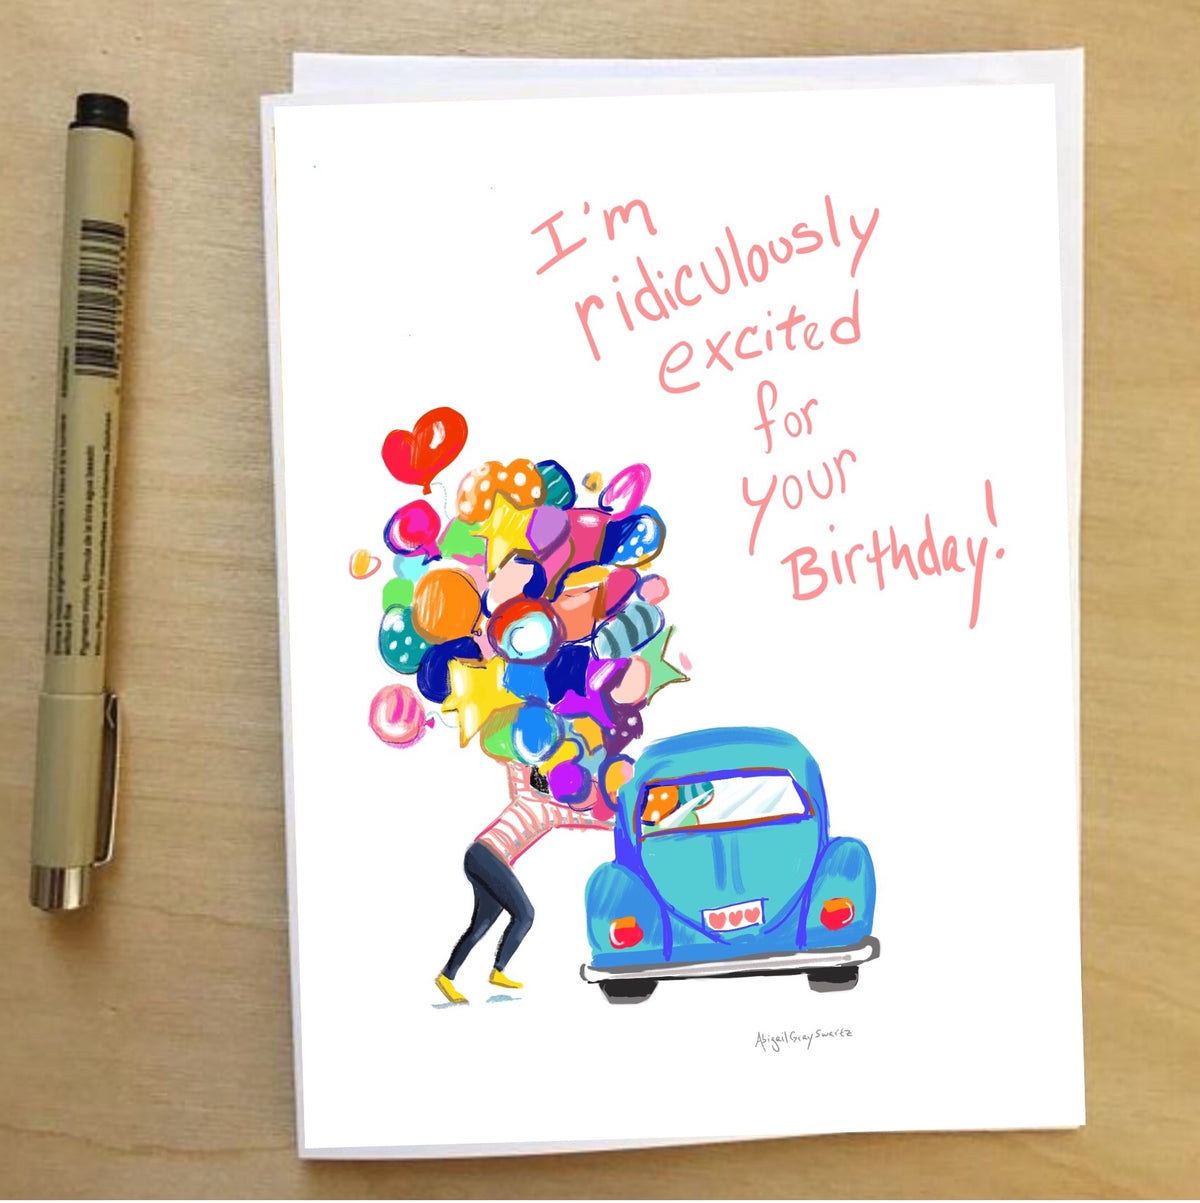 I’m ridiculously excited for your birthday --Greeting Card